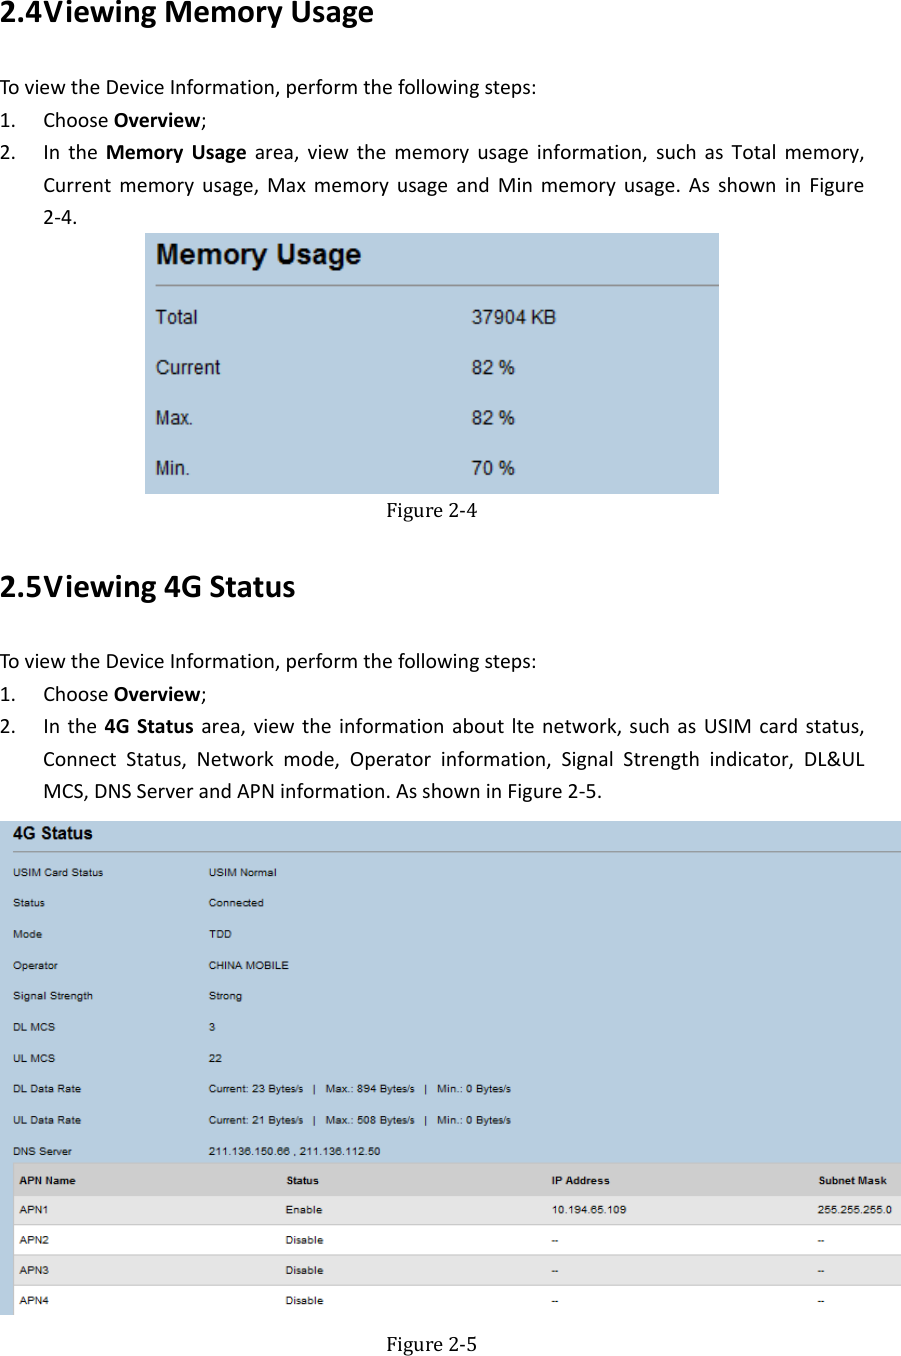   2.4 ViewingMemoryUsageToviewtheDeviceInformation,performthefollowingsteps:1. ChooseOverview;2. IntheMemoryUsagearea,viewthememoryusageinformation,suchasTotalmemory,Currentmemoryusage,MaxmemoryusageandMinmemoryusage.AsshowninFigure2‐4. Figure2‐42.5 Viewing4GStatusToviewtheDeviceInformation,performthefollowingsteps:1. ChooseOverview;2. Inthe4GStatusarea,viewtheinformationaboutltenetwork,suchasUSIMcardstatus,ConnectStatus,Networkmode,Operatorinformation,SignalStrengthindicator,DL&amp;ULMCS,DNSServerandAPNinformation.AsshowninFigure2‐5.  Figure2‐5